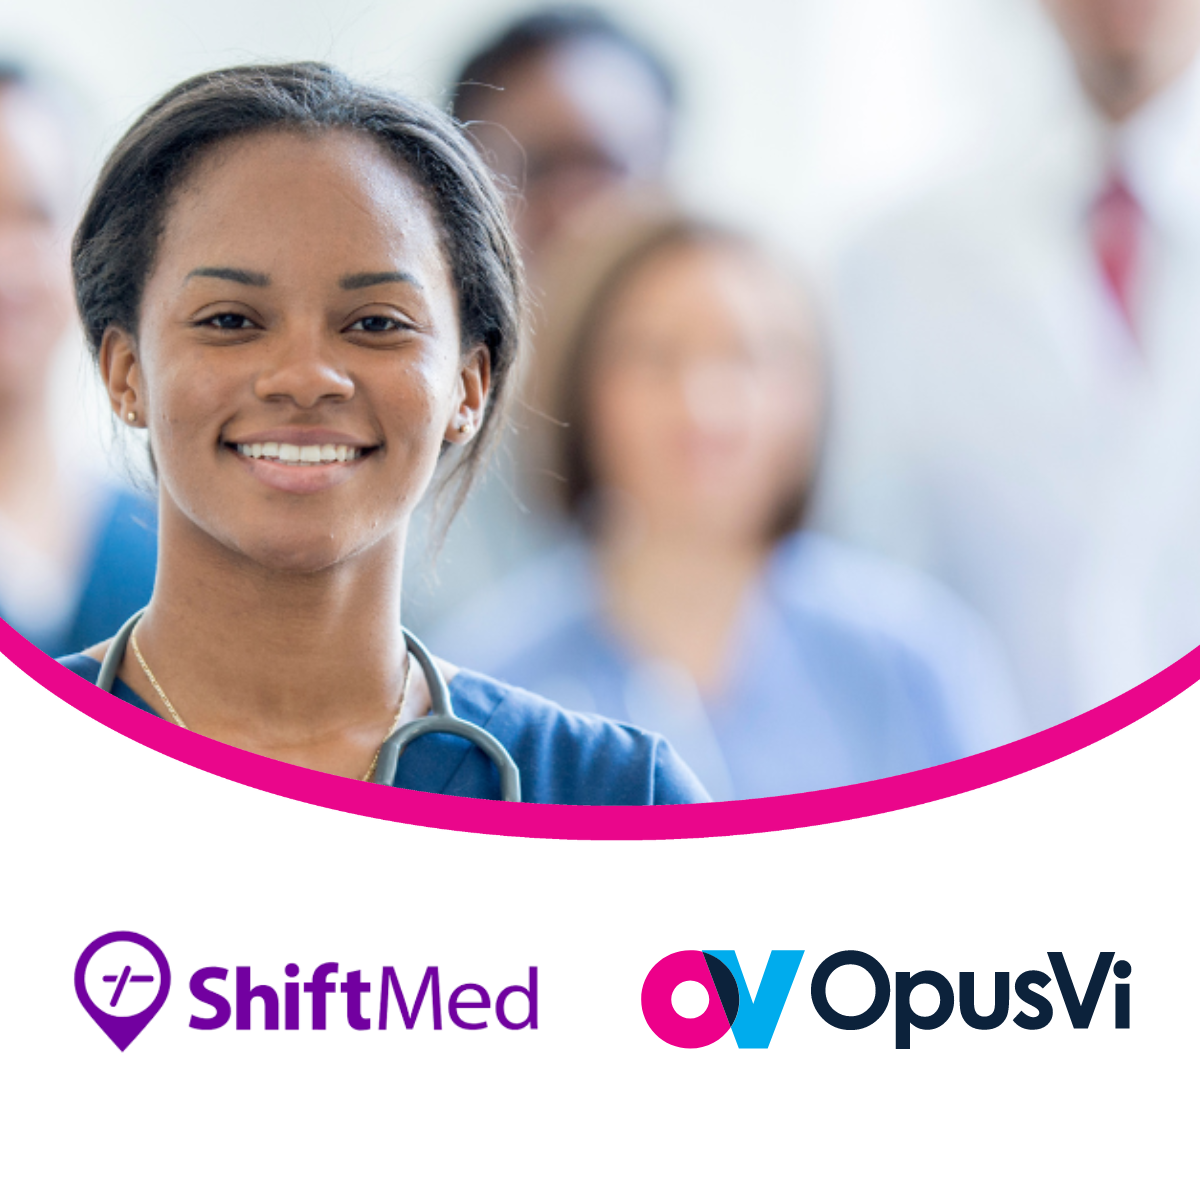 OpusVi Joins Forces With ShiftMed To Offer Training to 350,000 Healthcare Professionals Amid Ongoing Staffing Shortages